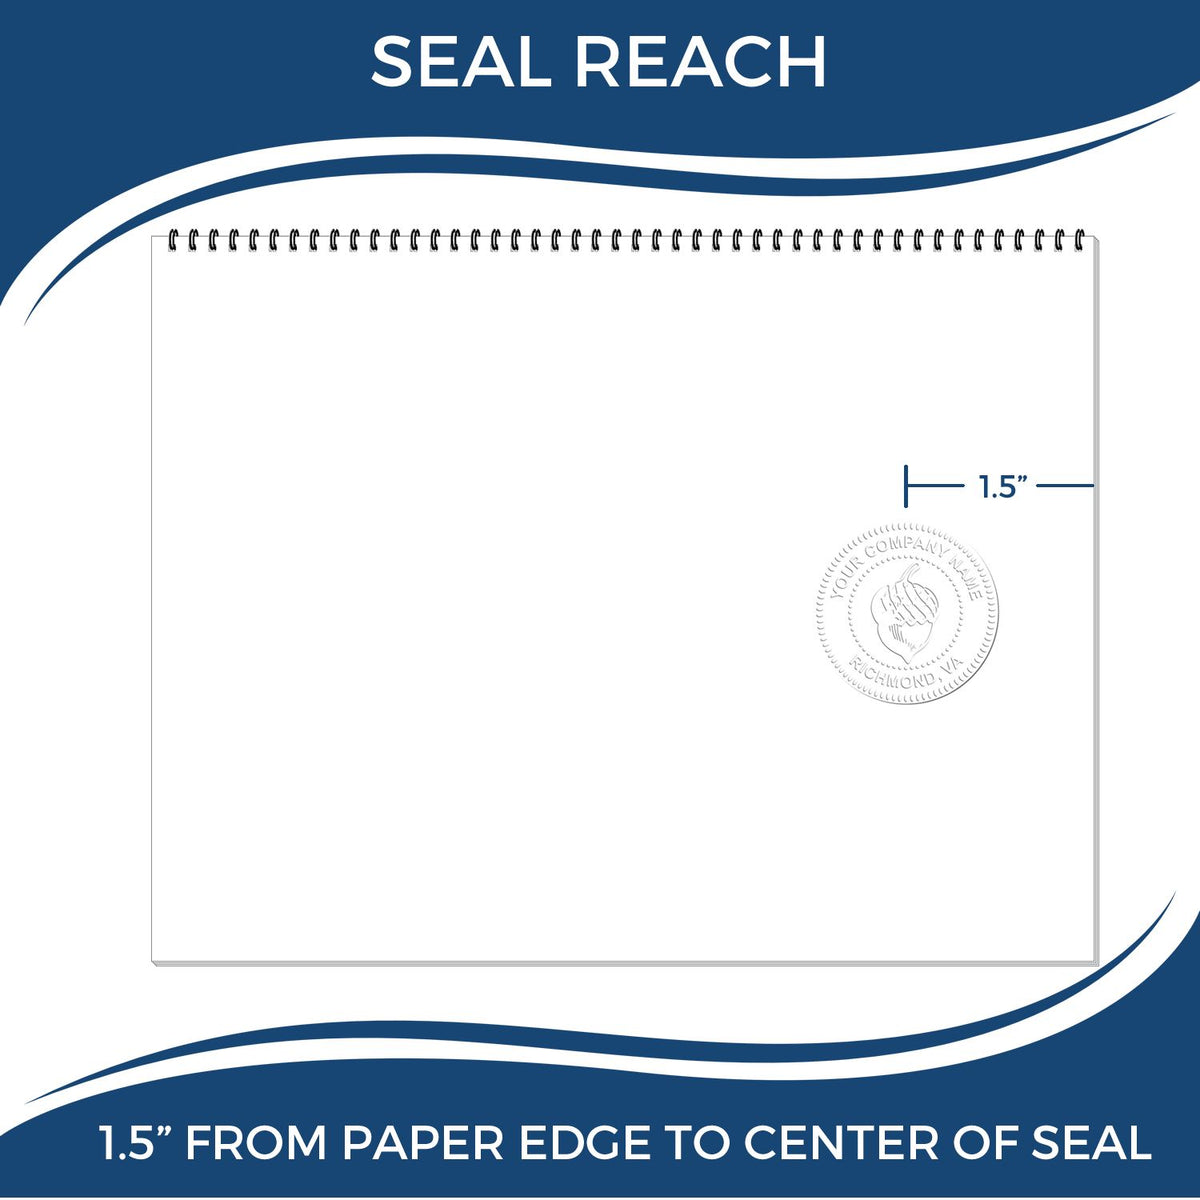 An infographic showing the seal reach which is represented by a ruler and a miniature seal image of the Handheld Louisiana Professional Engineer Embosser